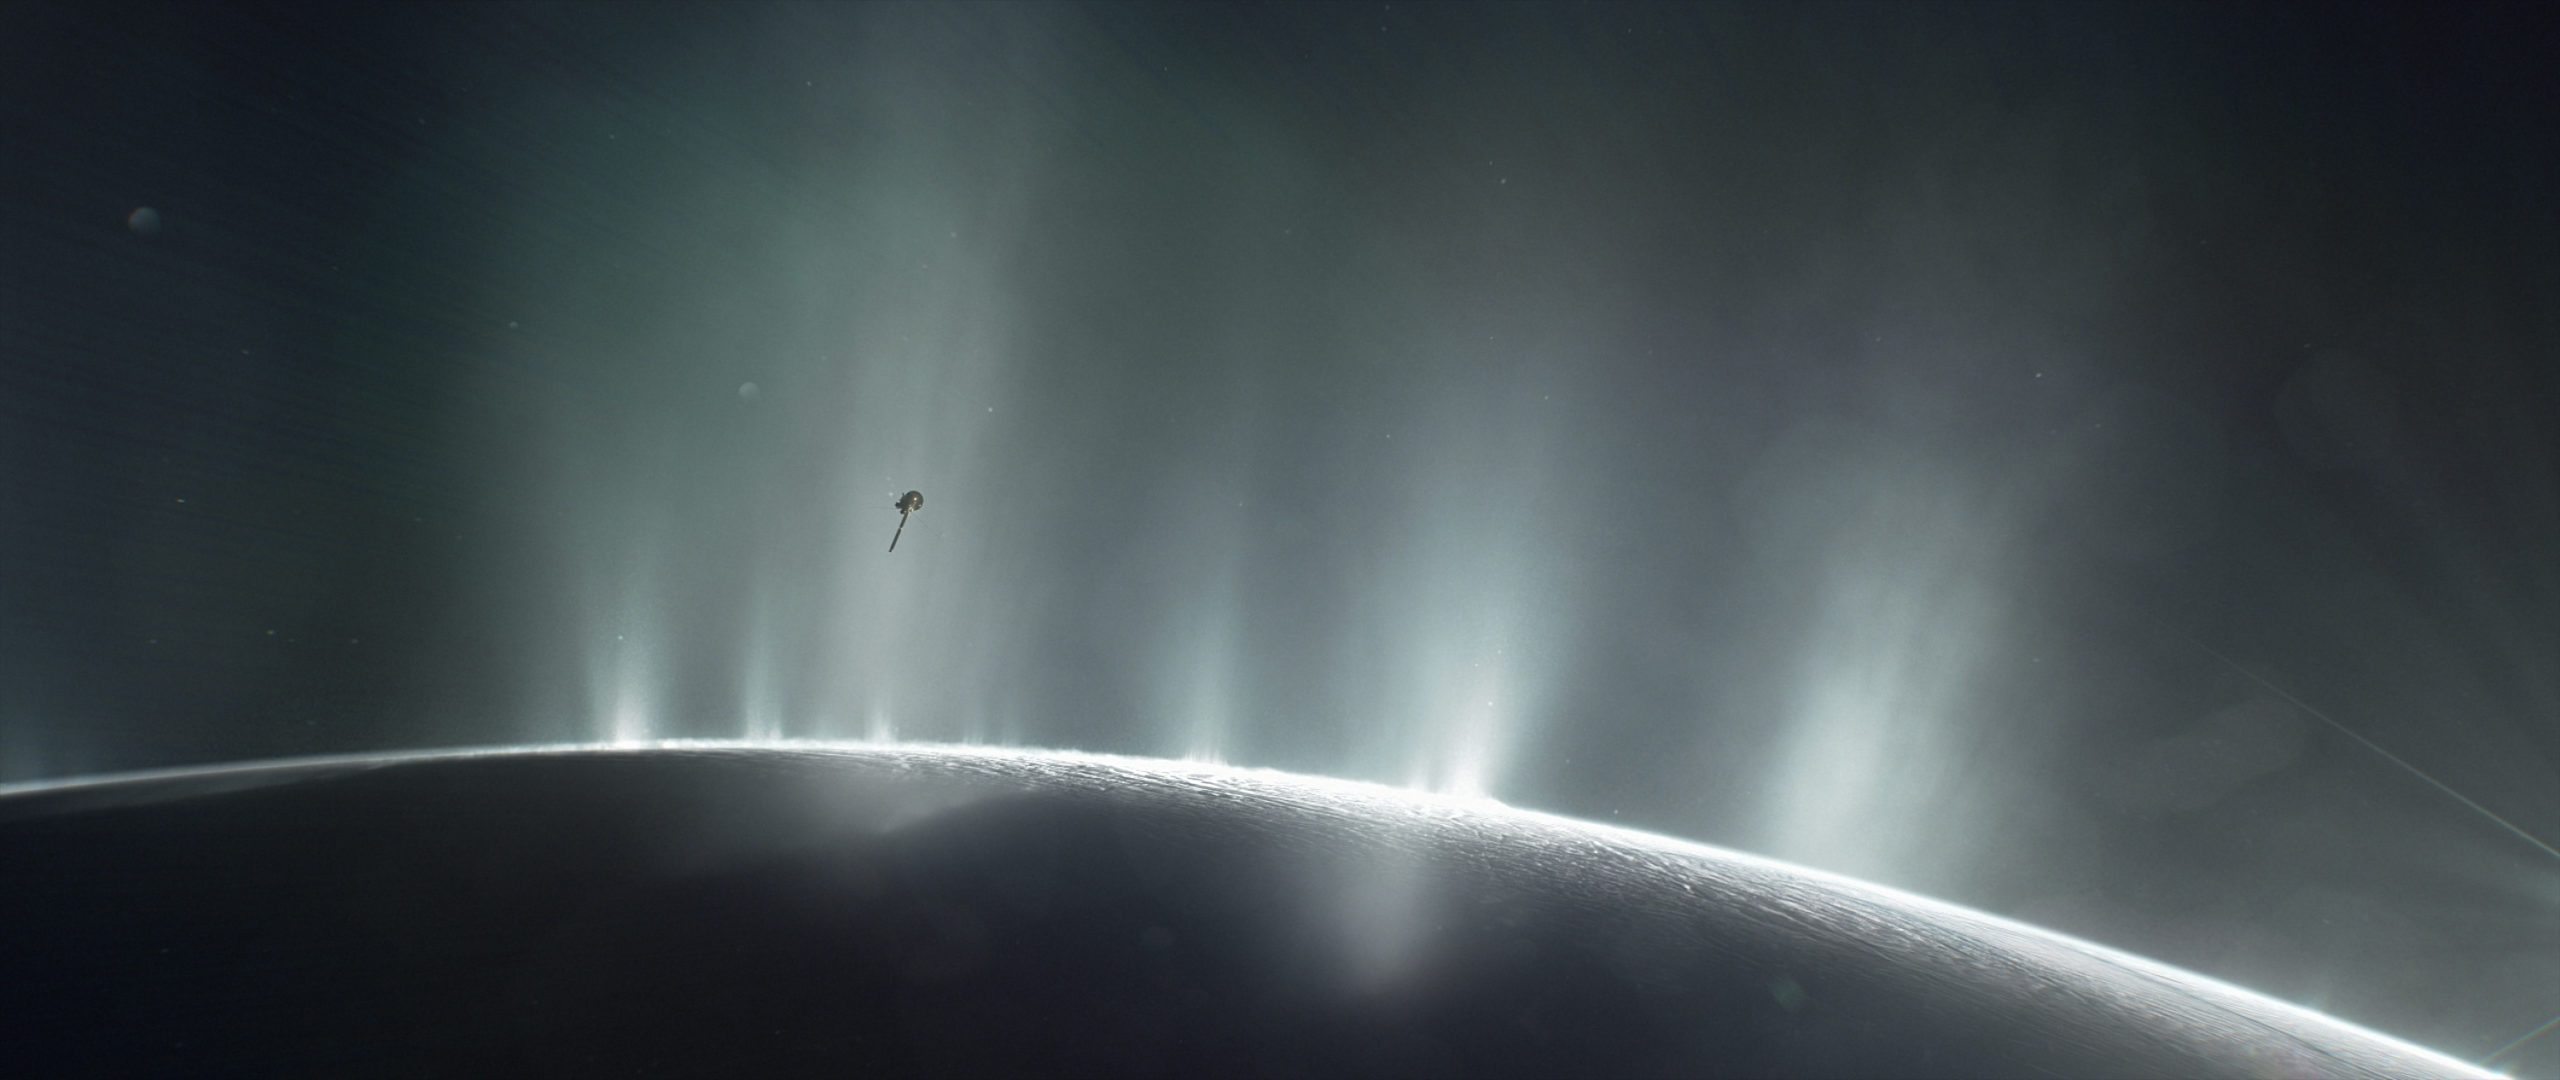 Artist's depiction of the Cassini probe travelling through the geysers shooting up from Enceladus.  (Image: NASA/JPL-Caltech)